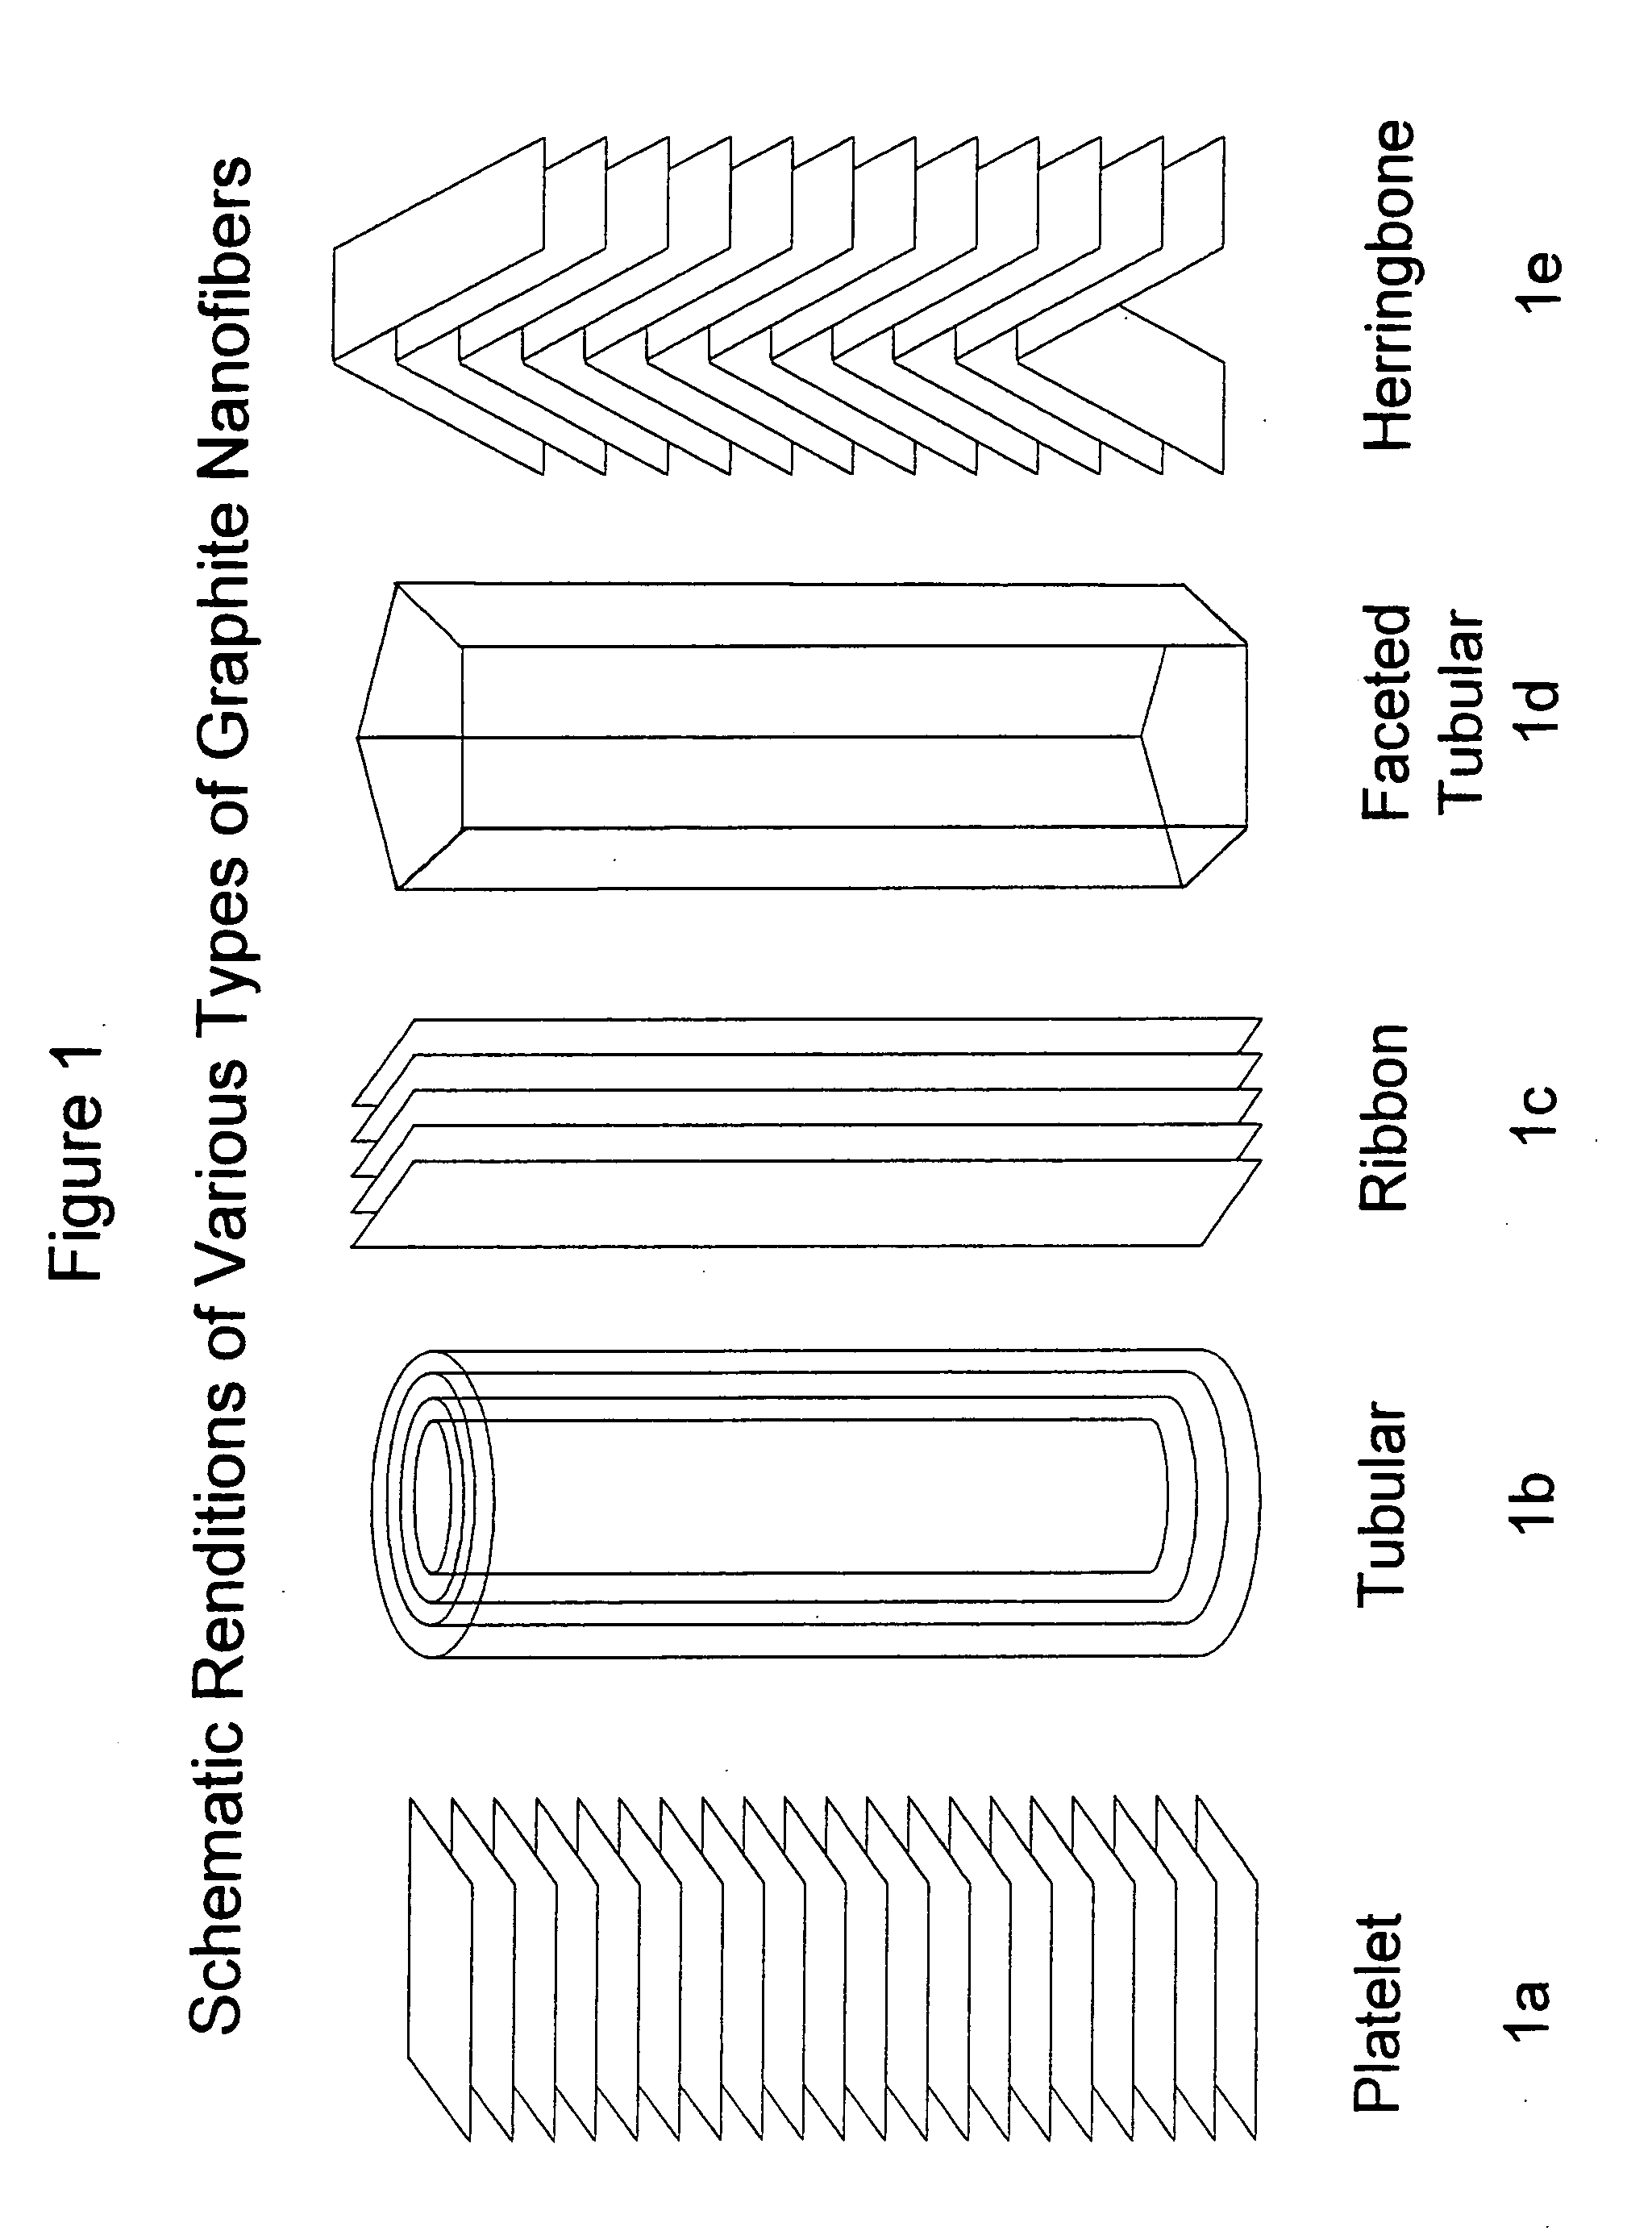 Conductive polymeric structures containing graphite nanofibers having graphite sheets parallel to the growth axis